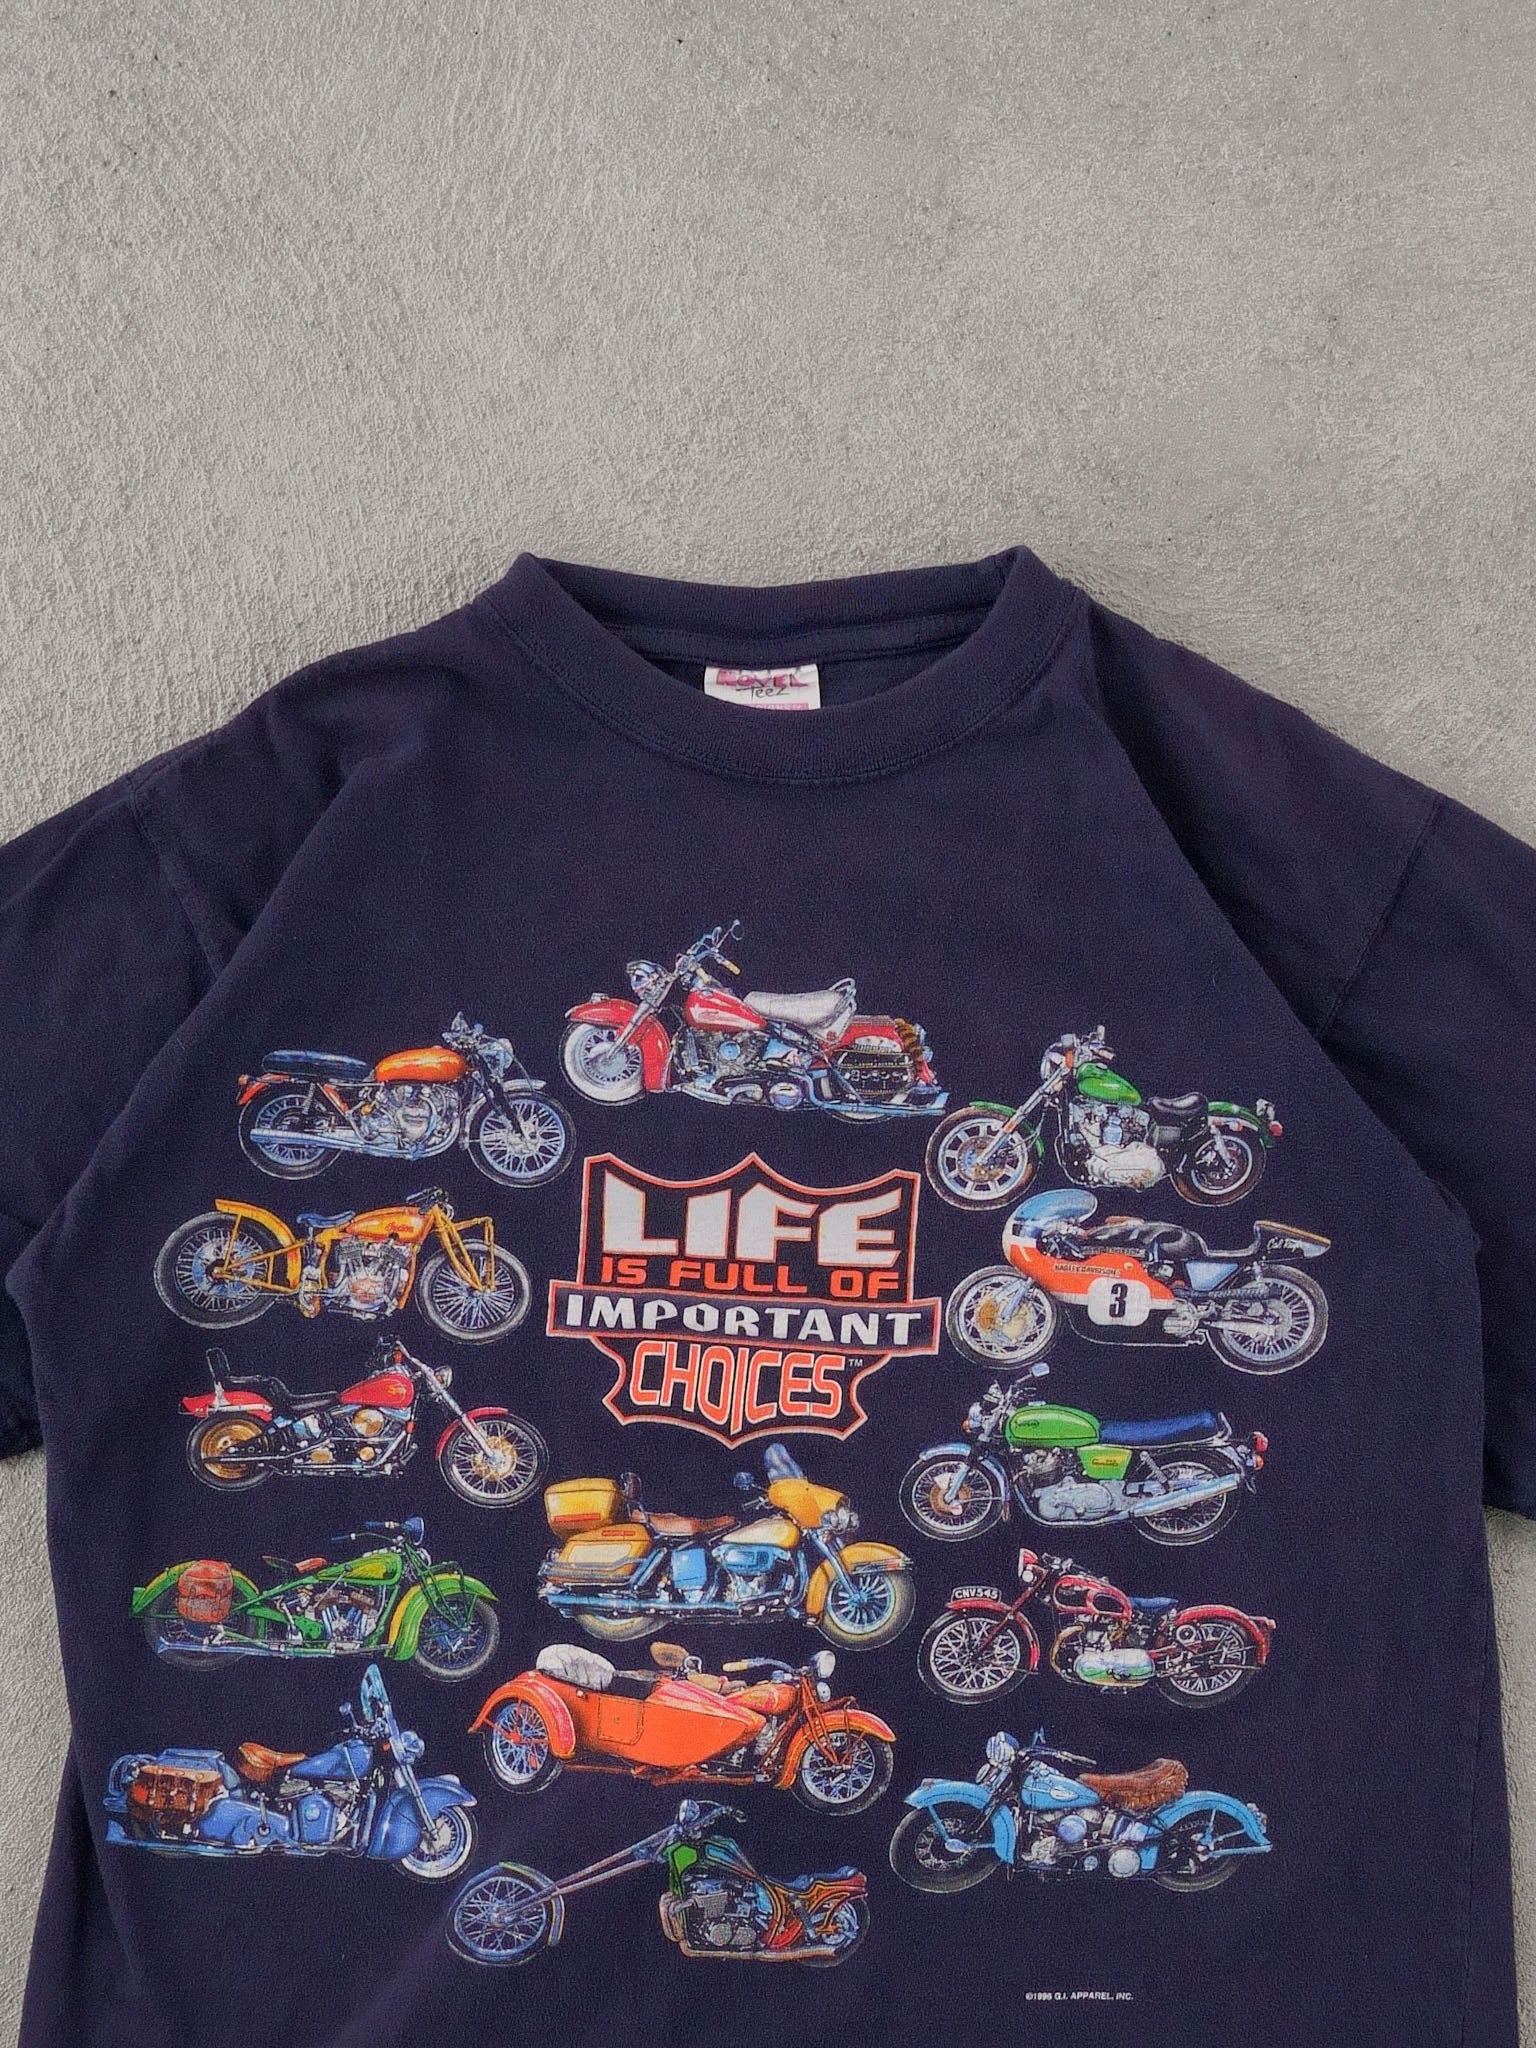 Vintage 90s Blue "Life is full of Important chocies" Biker Graphic Tee (M)